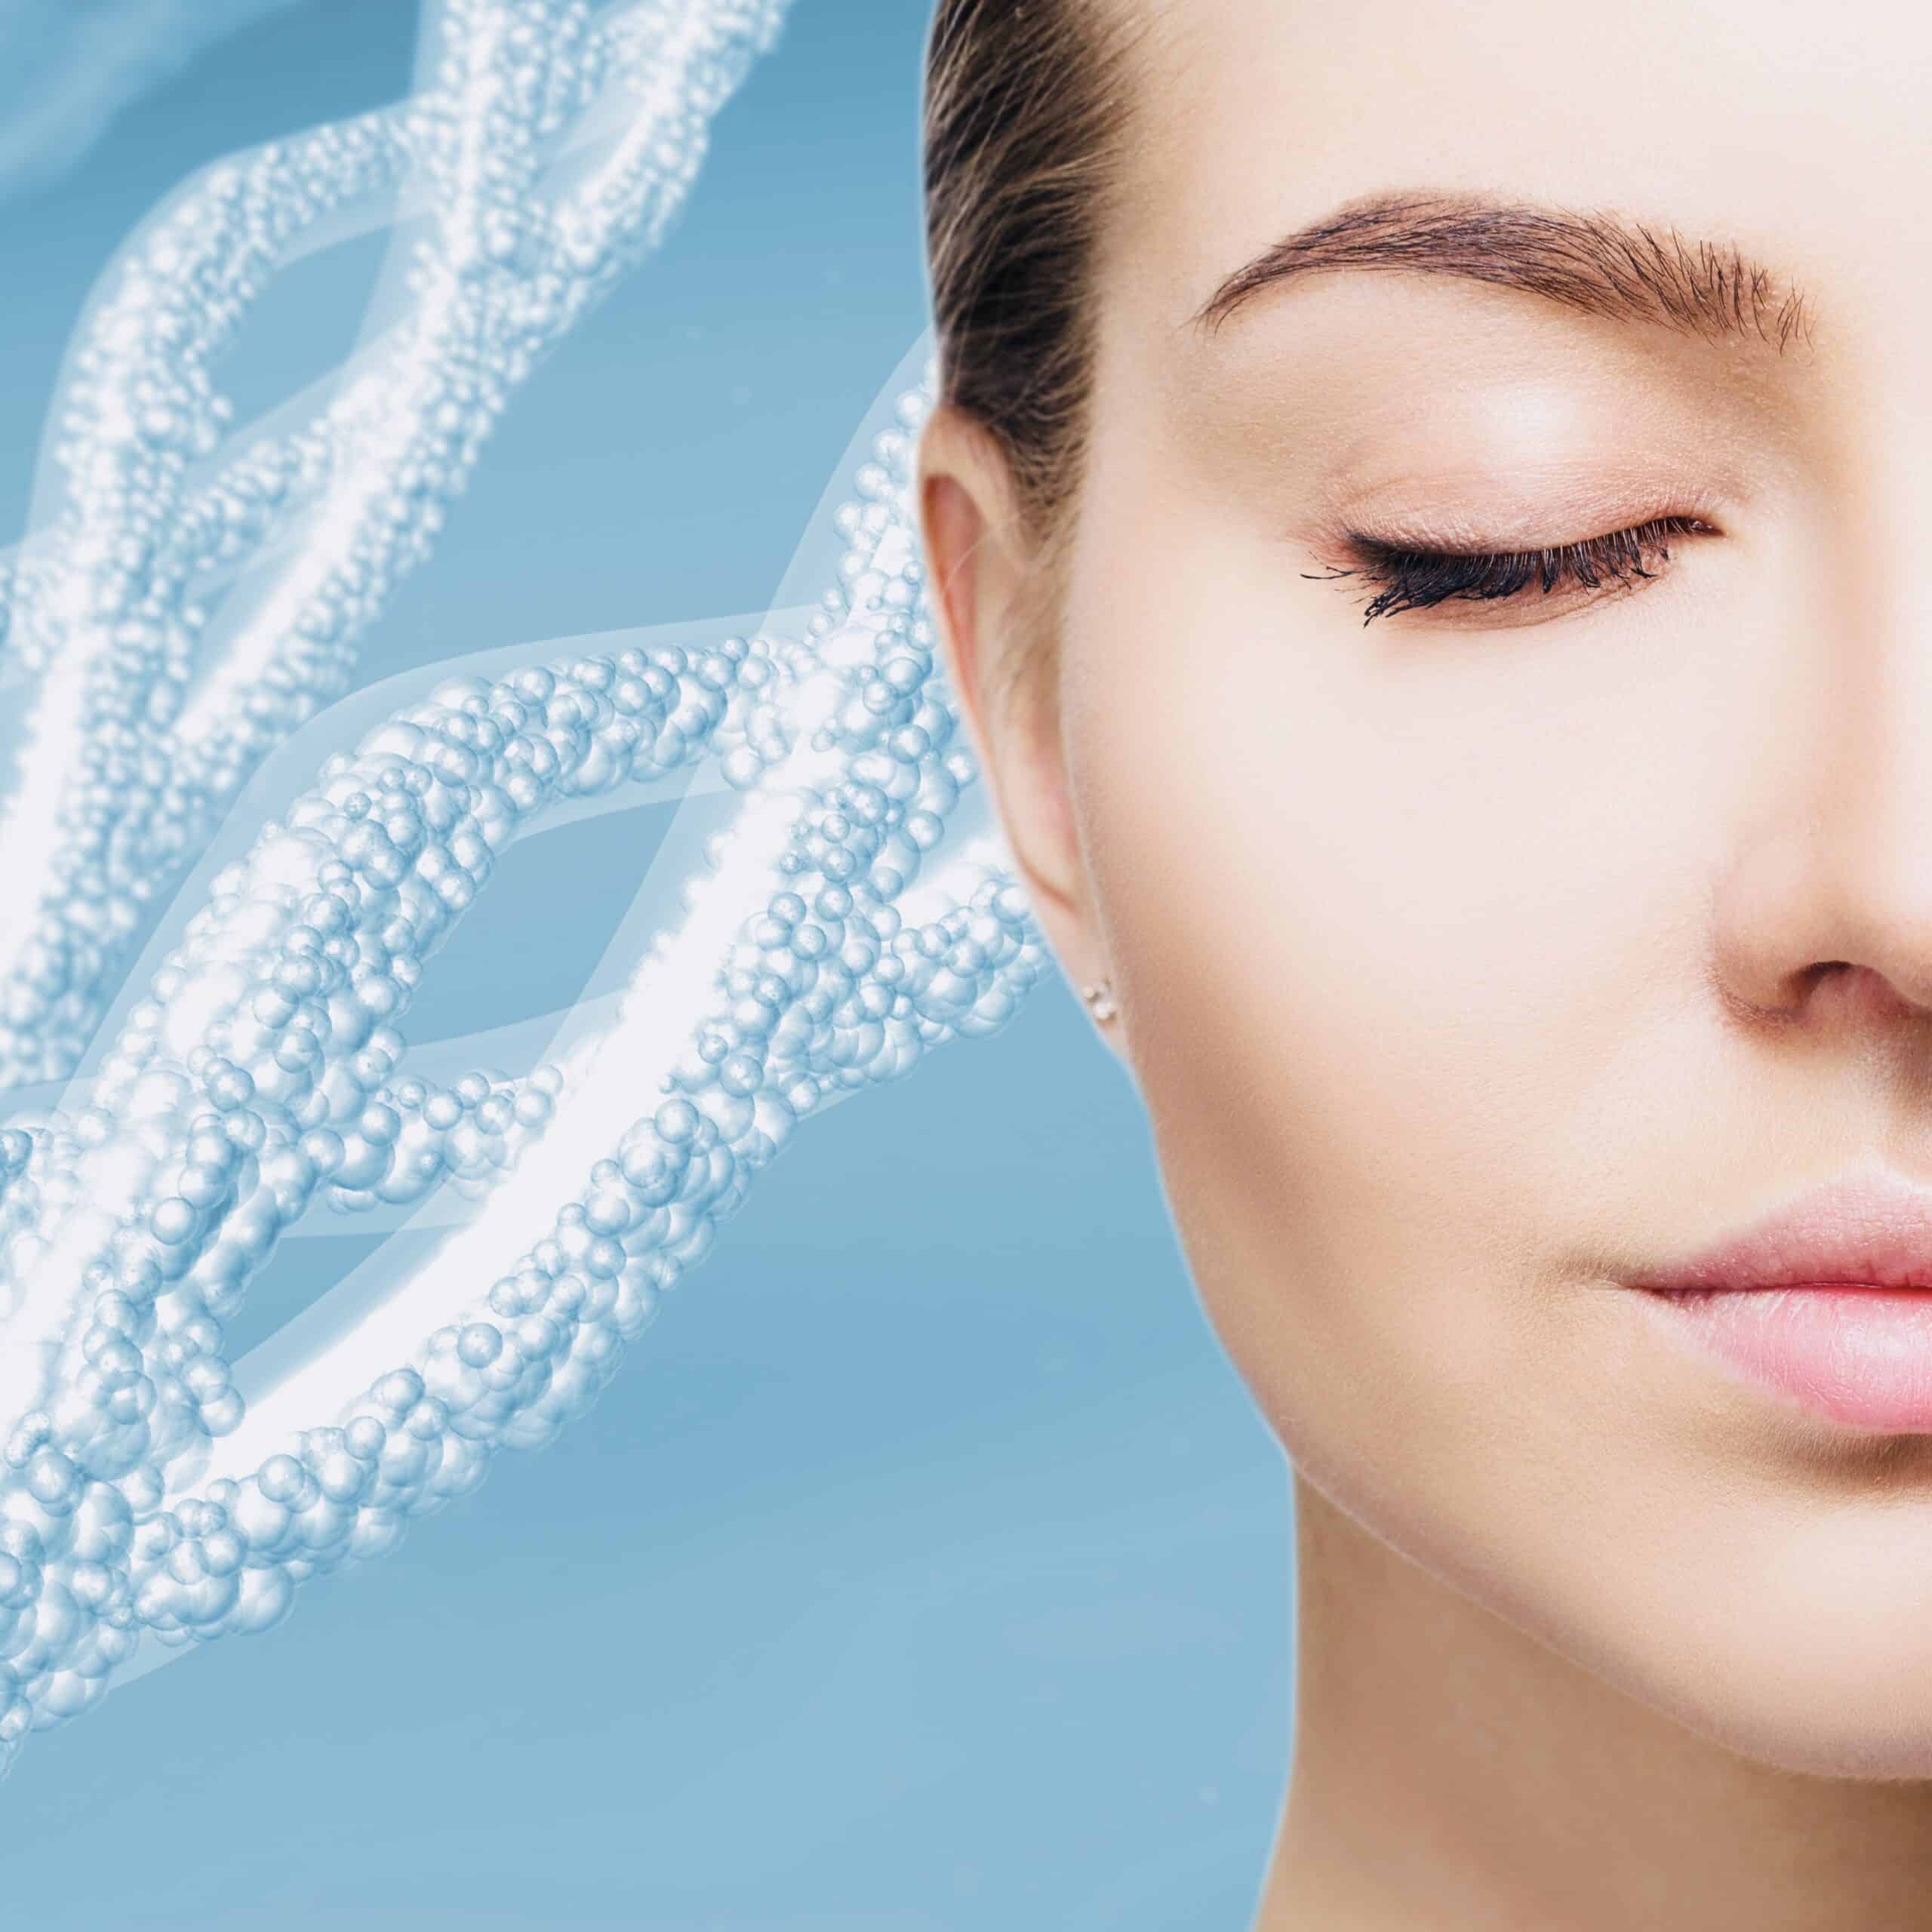 Collagen Loss and Aging_How to Boost Collagen Production in the Skin at Cerulean Medical Institute in Kelowna BC